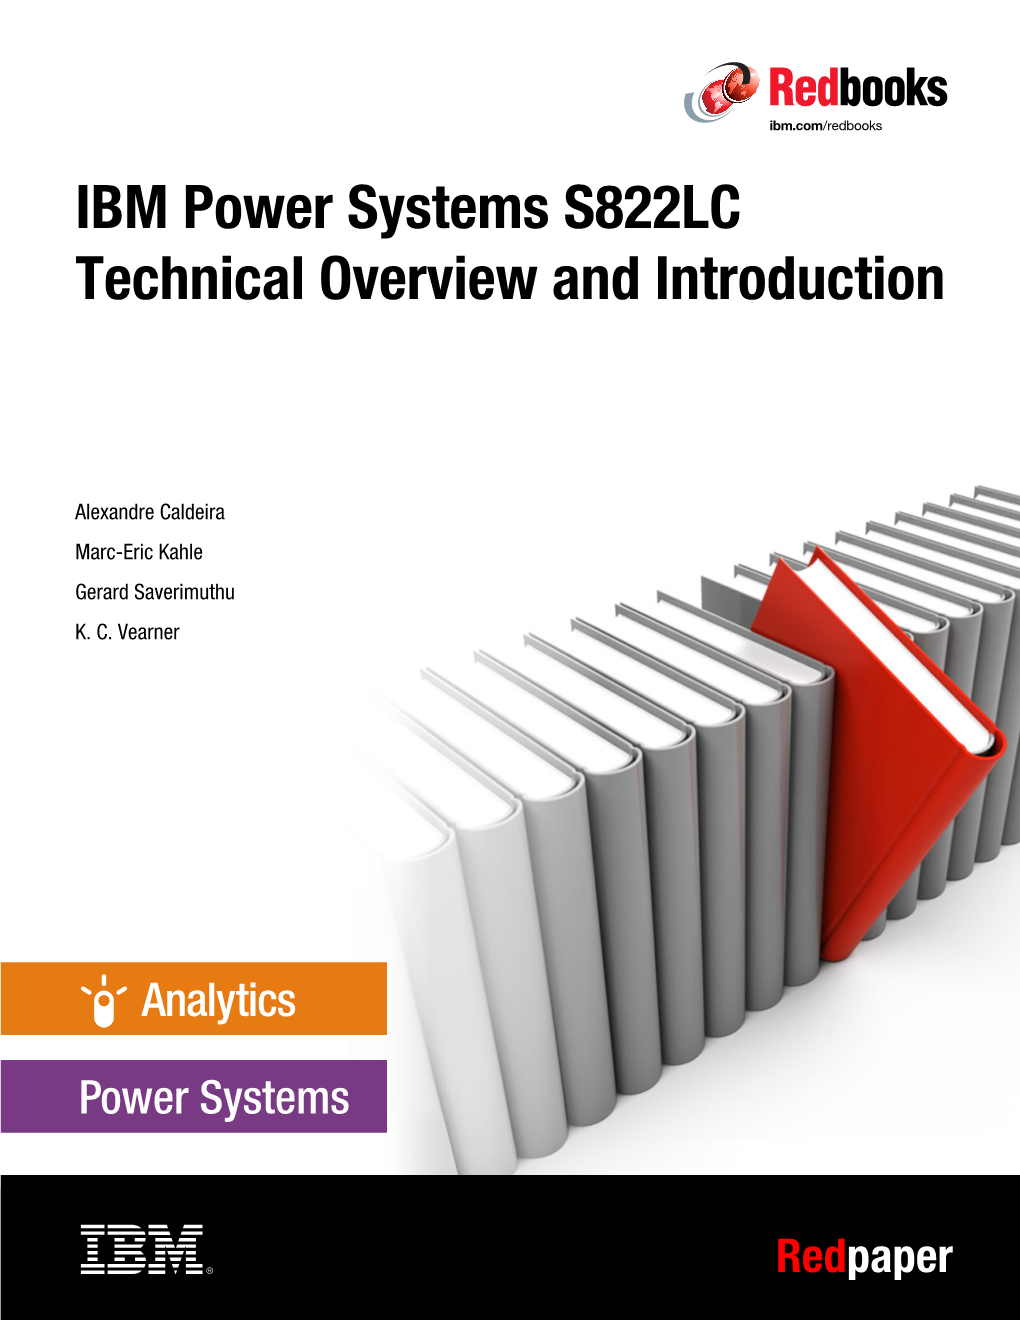 IBM Power System S822LC Technical Overview and Introduction